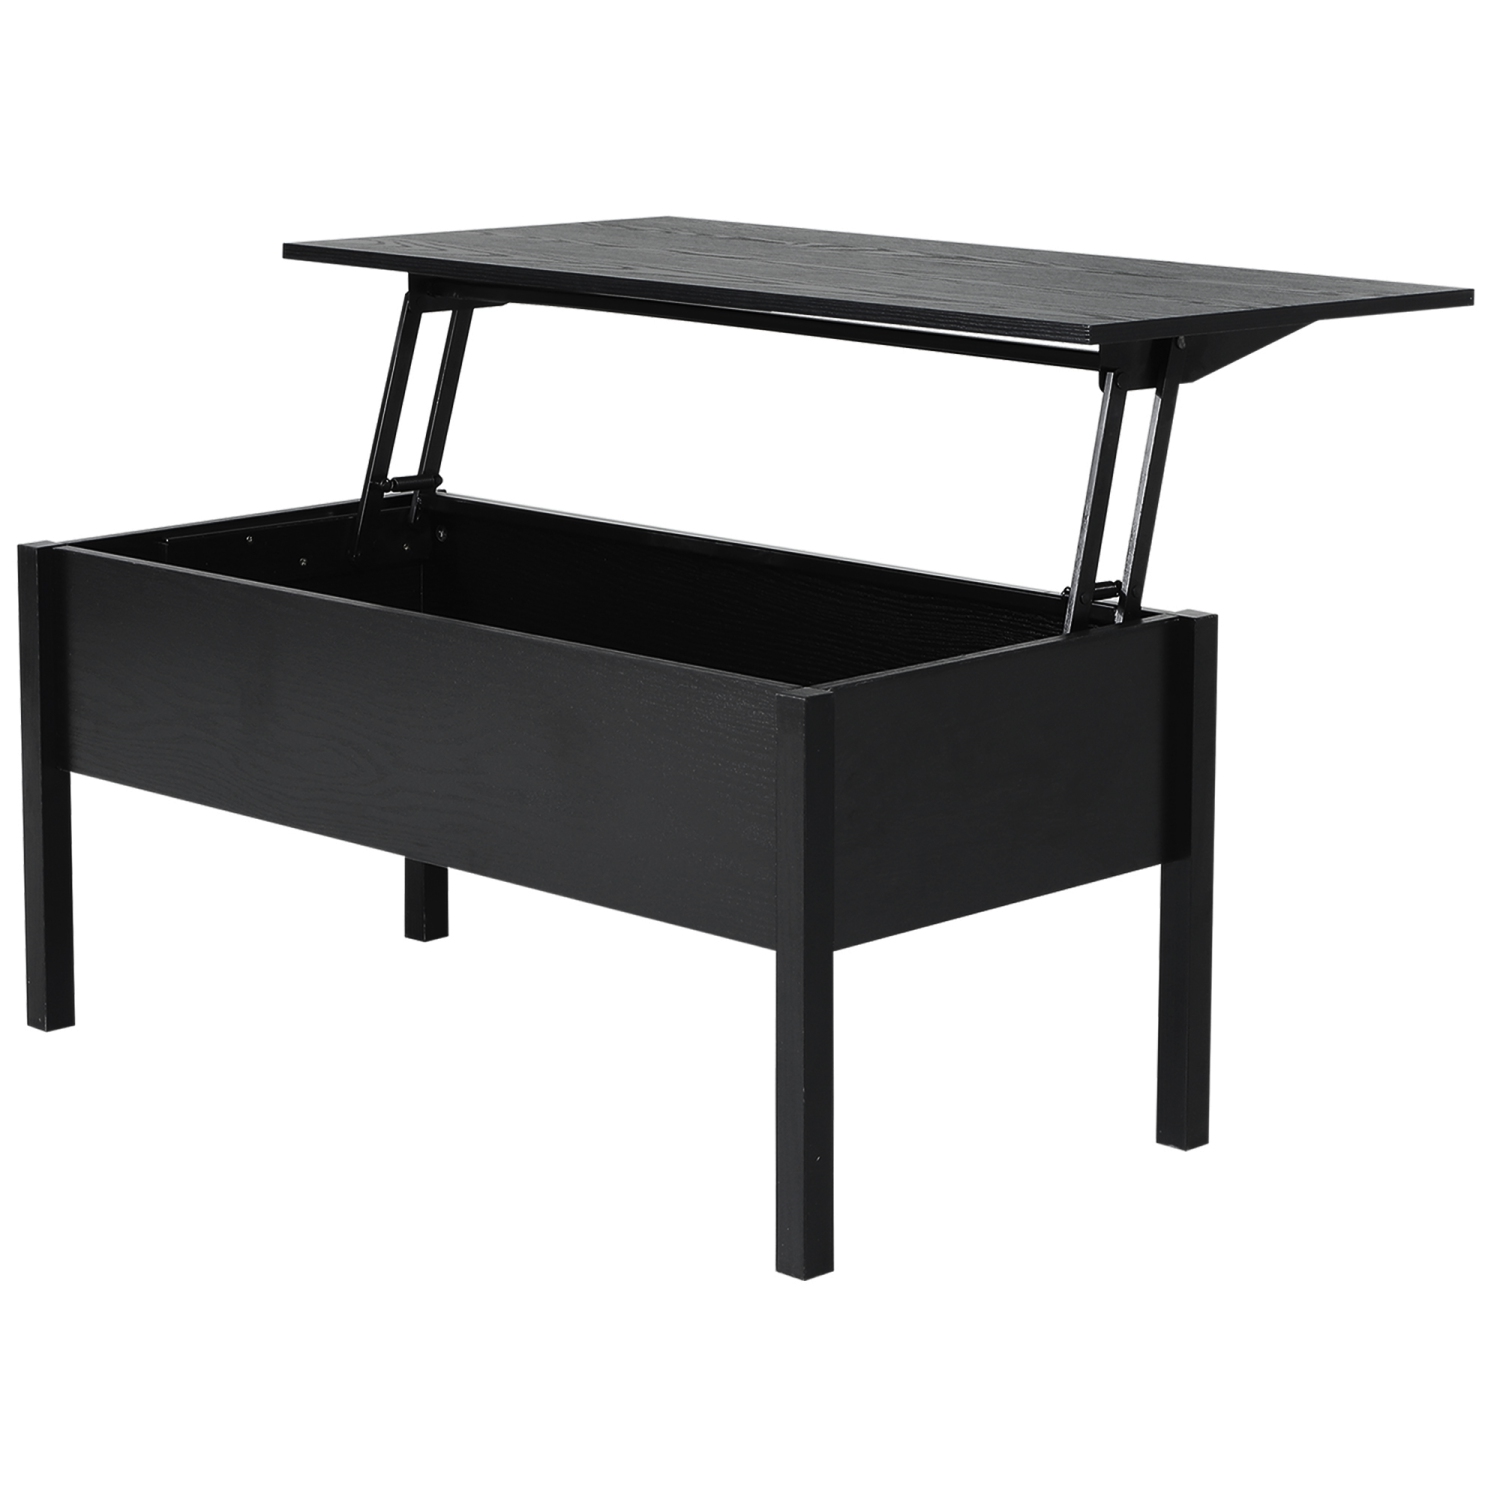 HOMCOM 39" Modern Lift Top Coffee Table with Hidden Storage Compartment, Center Table for Living Room, Black